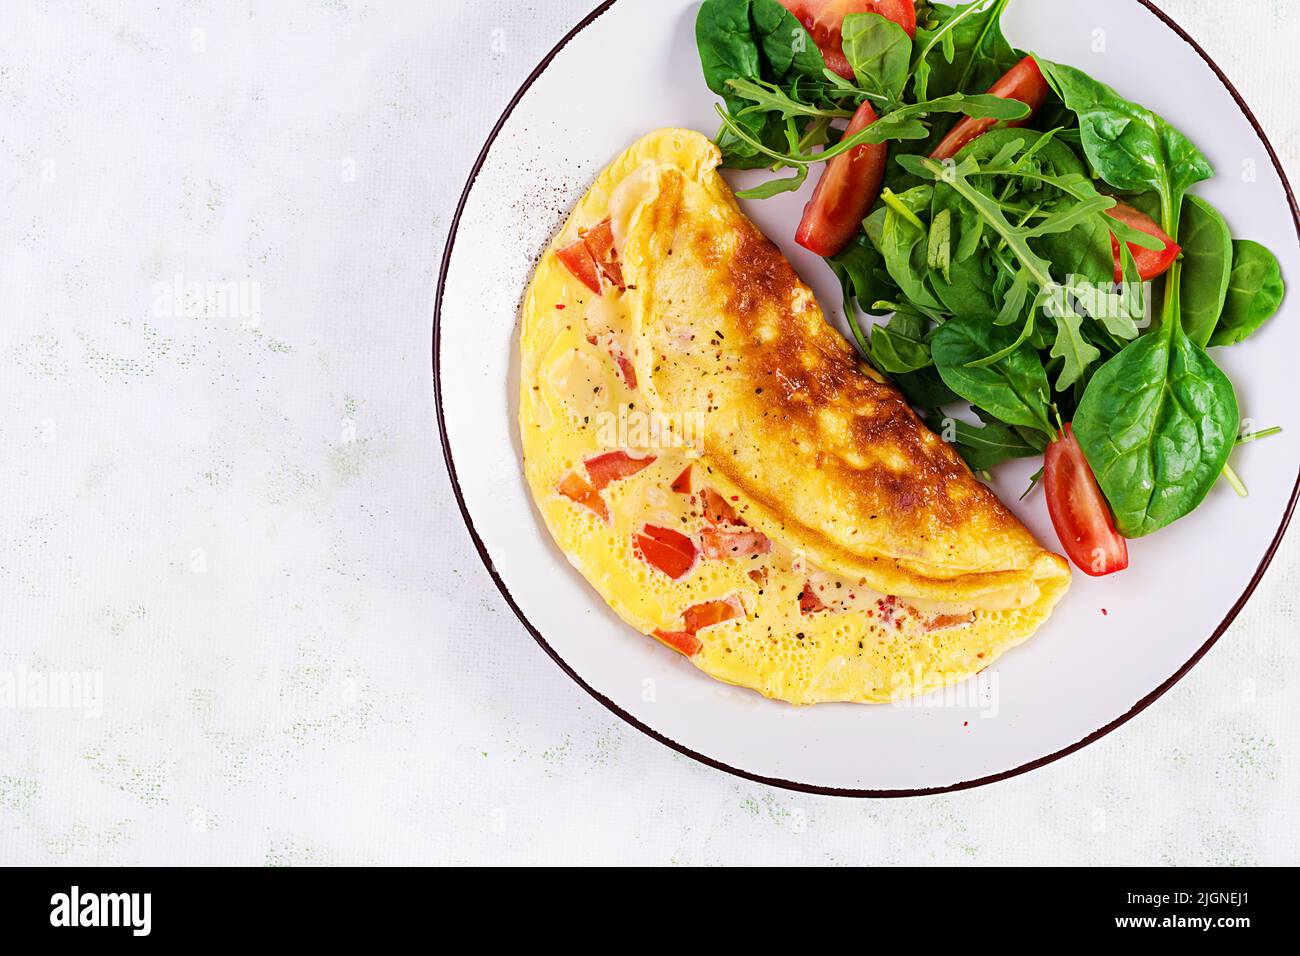 Omelette with tomatoes and salad on white plate.  Frittata - italian omelet. Top view Stock Photo